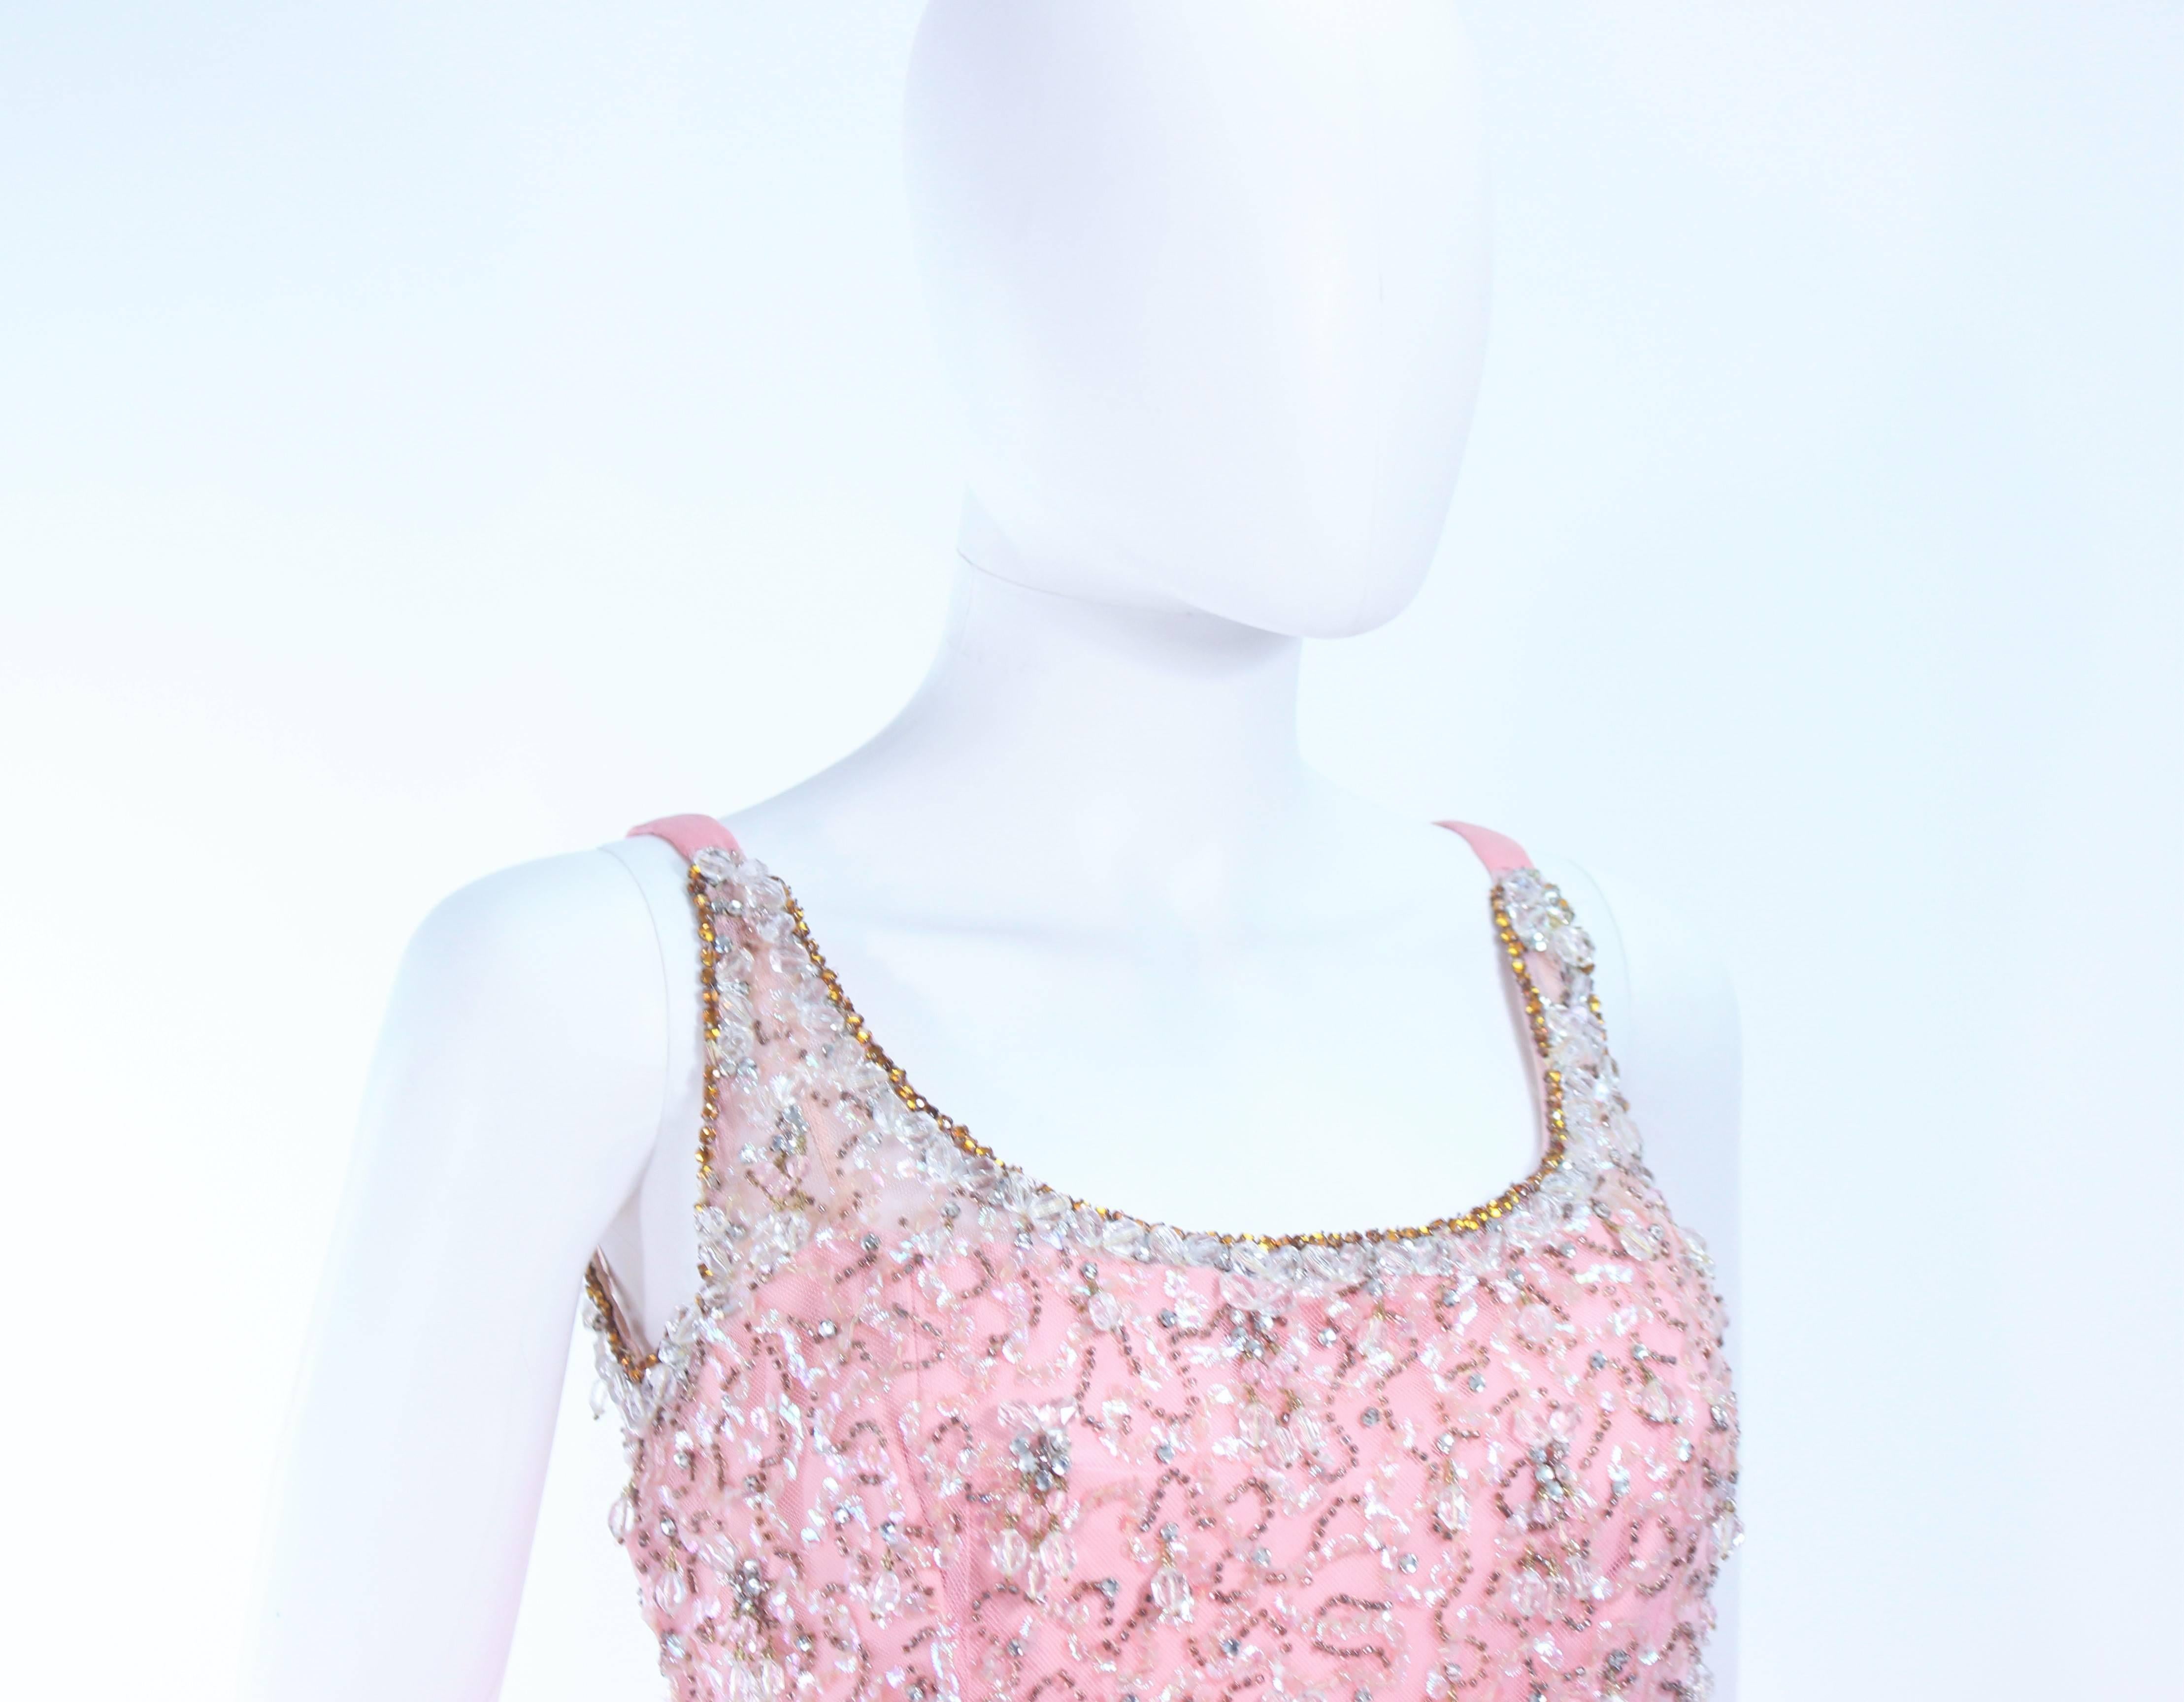 Women's I. MAGNIN 1960's Hand Beaded Pink Chiffon Gown Size 4 For Sale